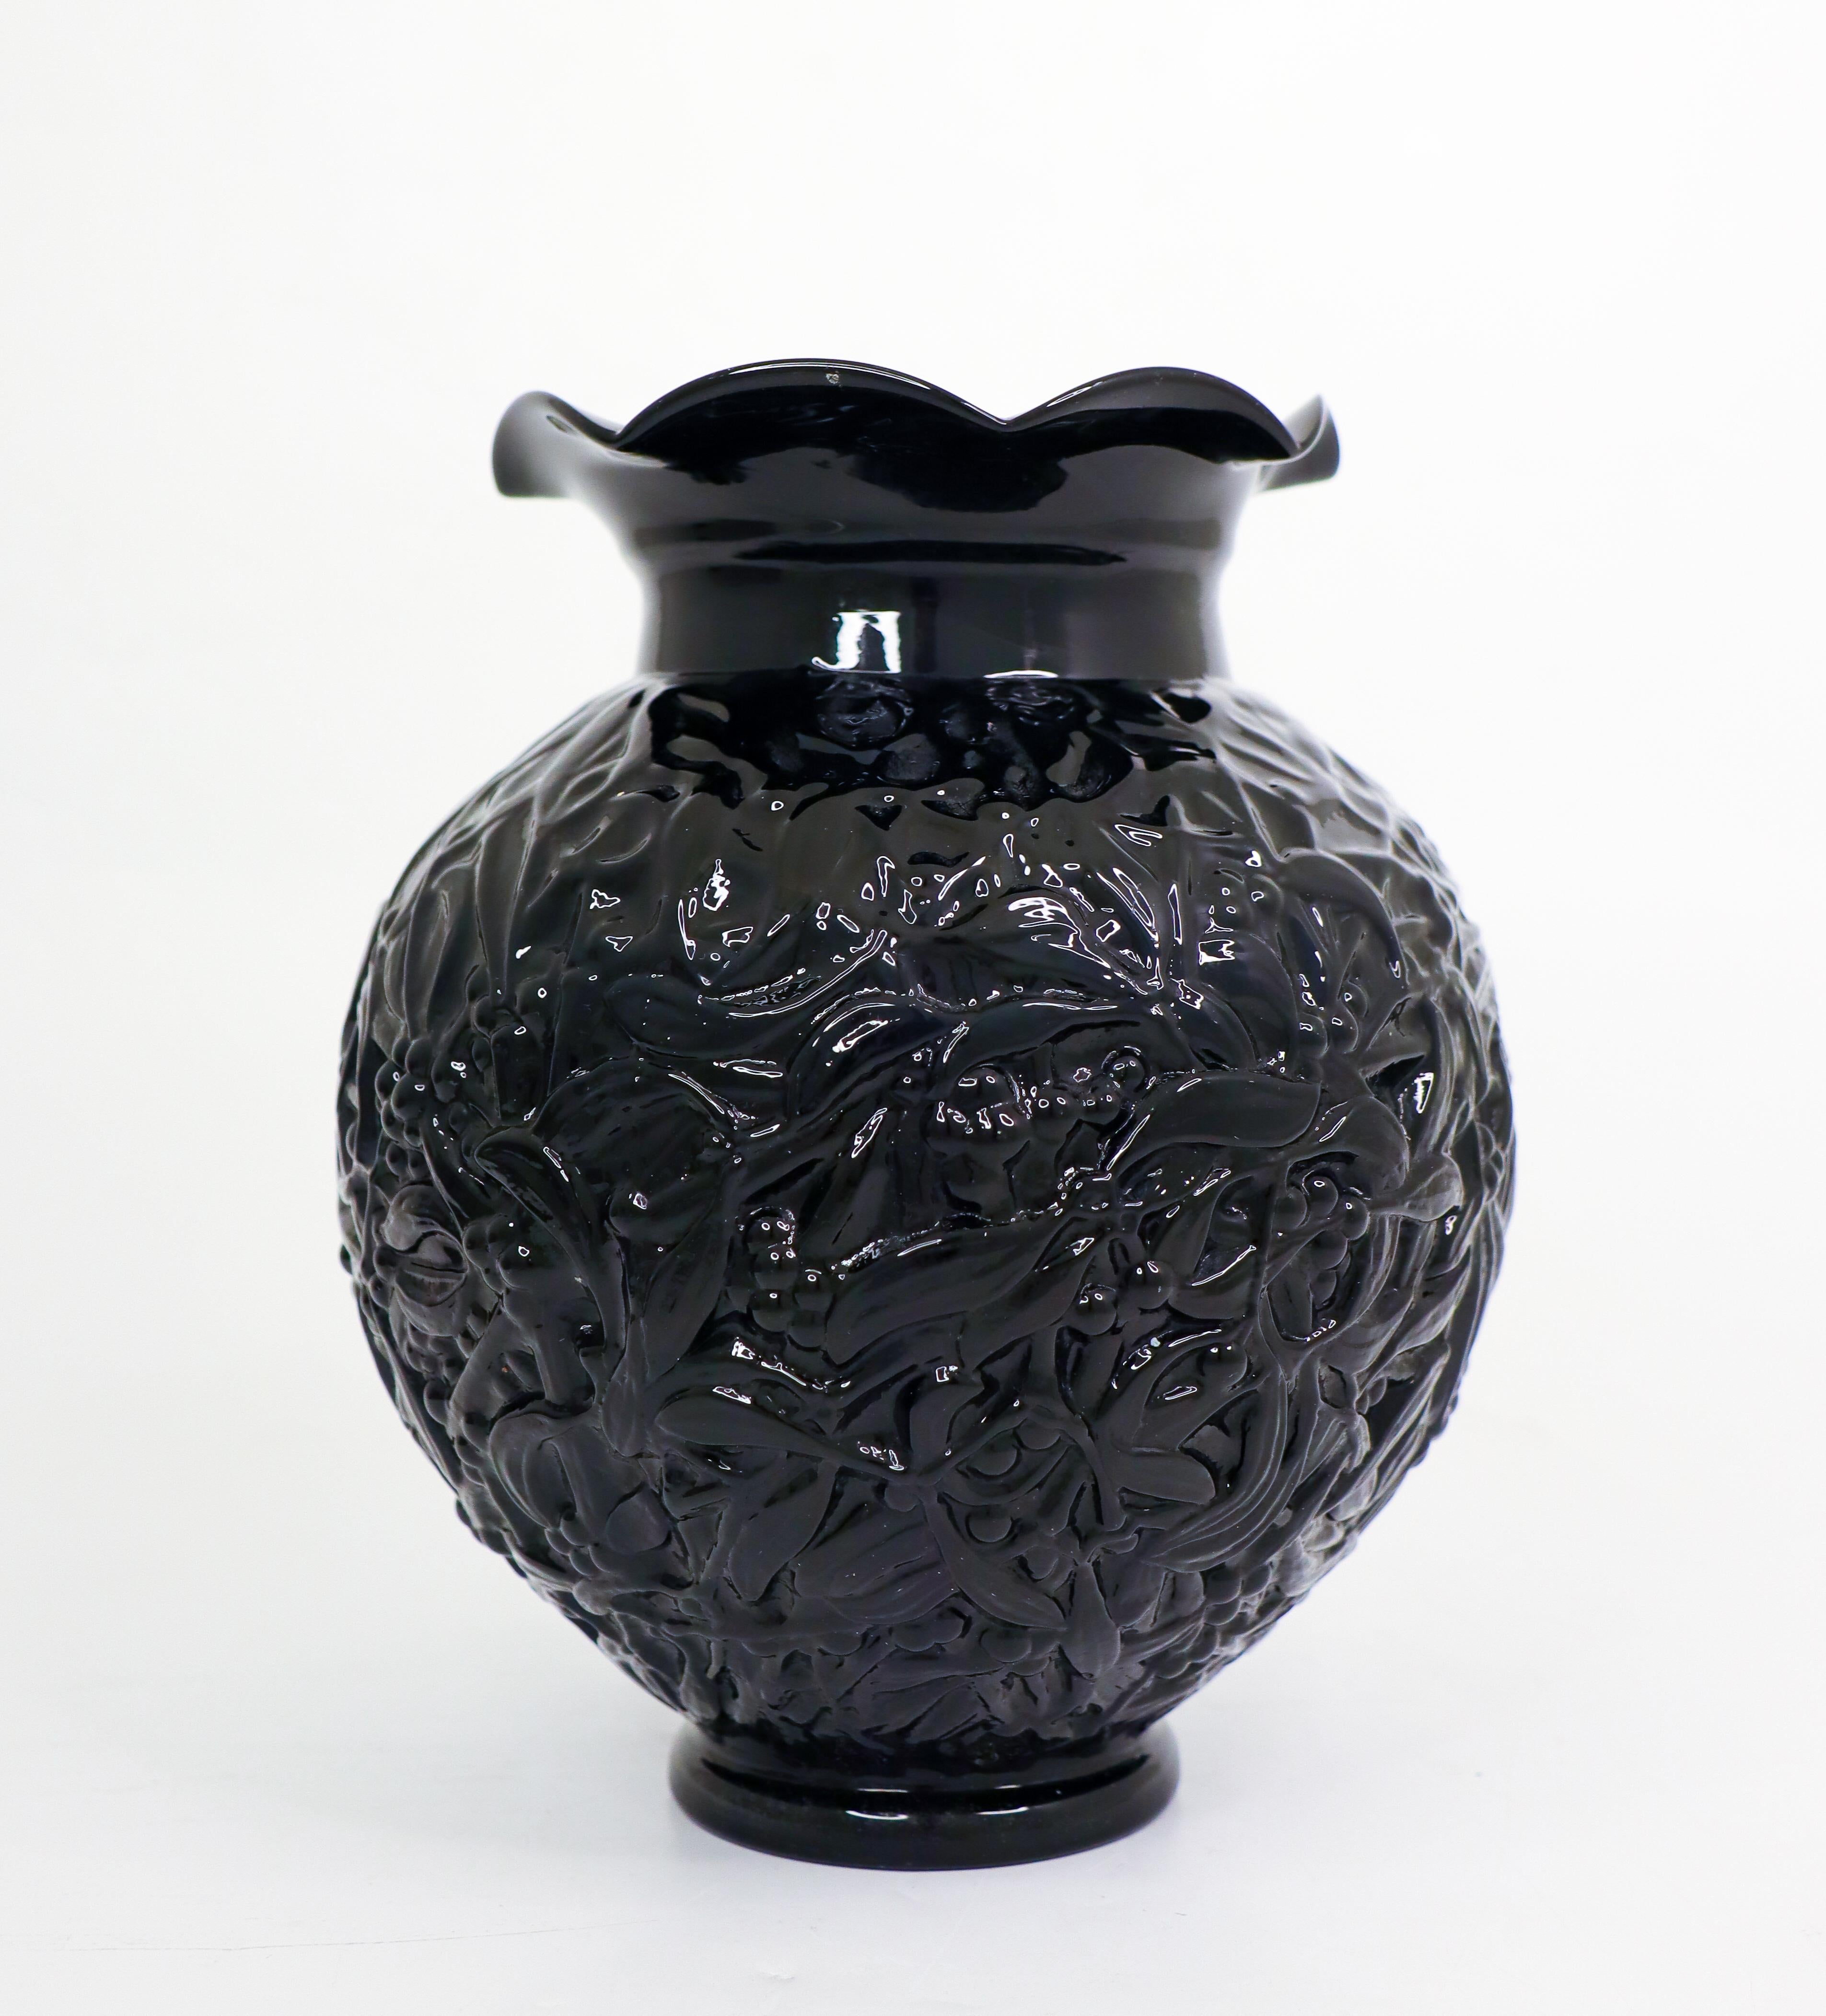 A lovely black glass vase in molded glass designed in 1930s by Edvin Ollers and produced at Elme Glassworks in Sweden. The vase is 20,5 cm high and in excellent condition. It is not marked. 